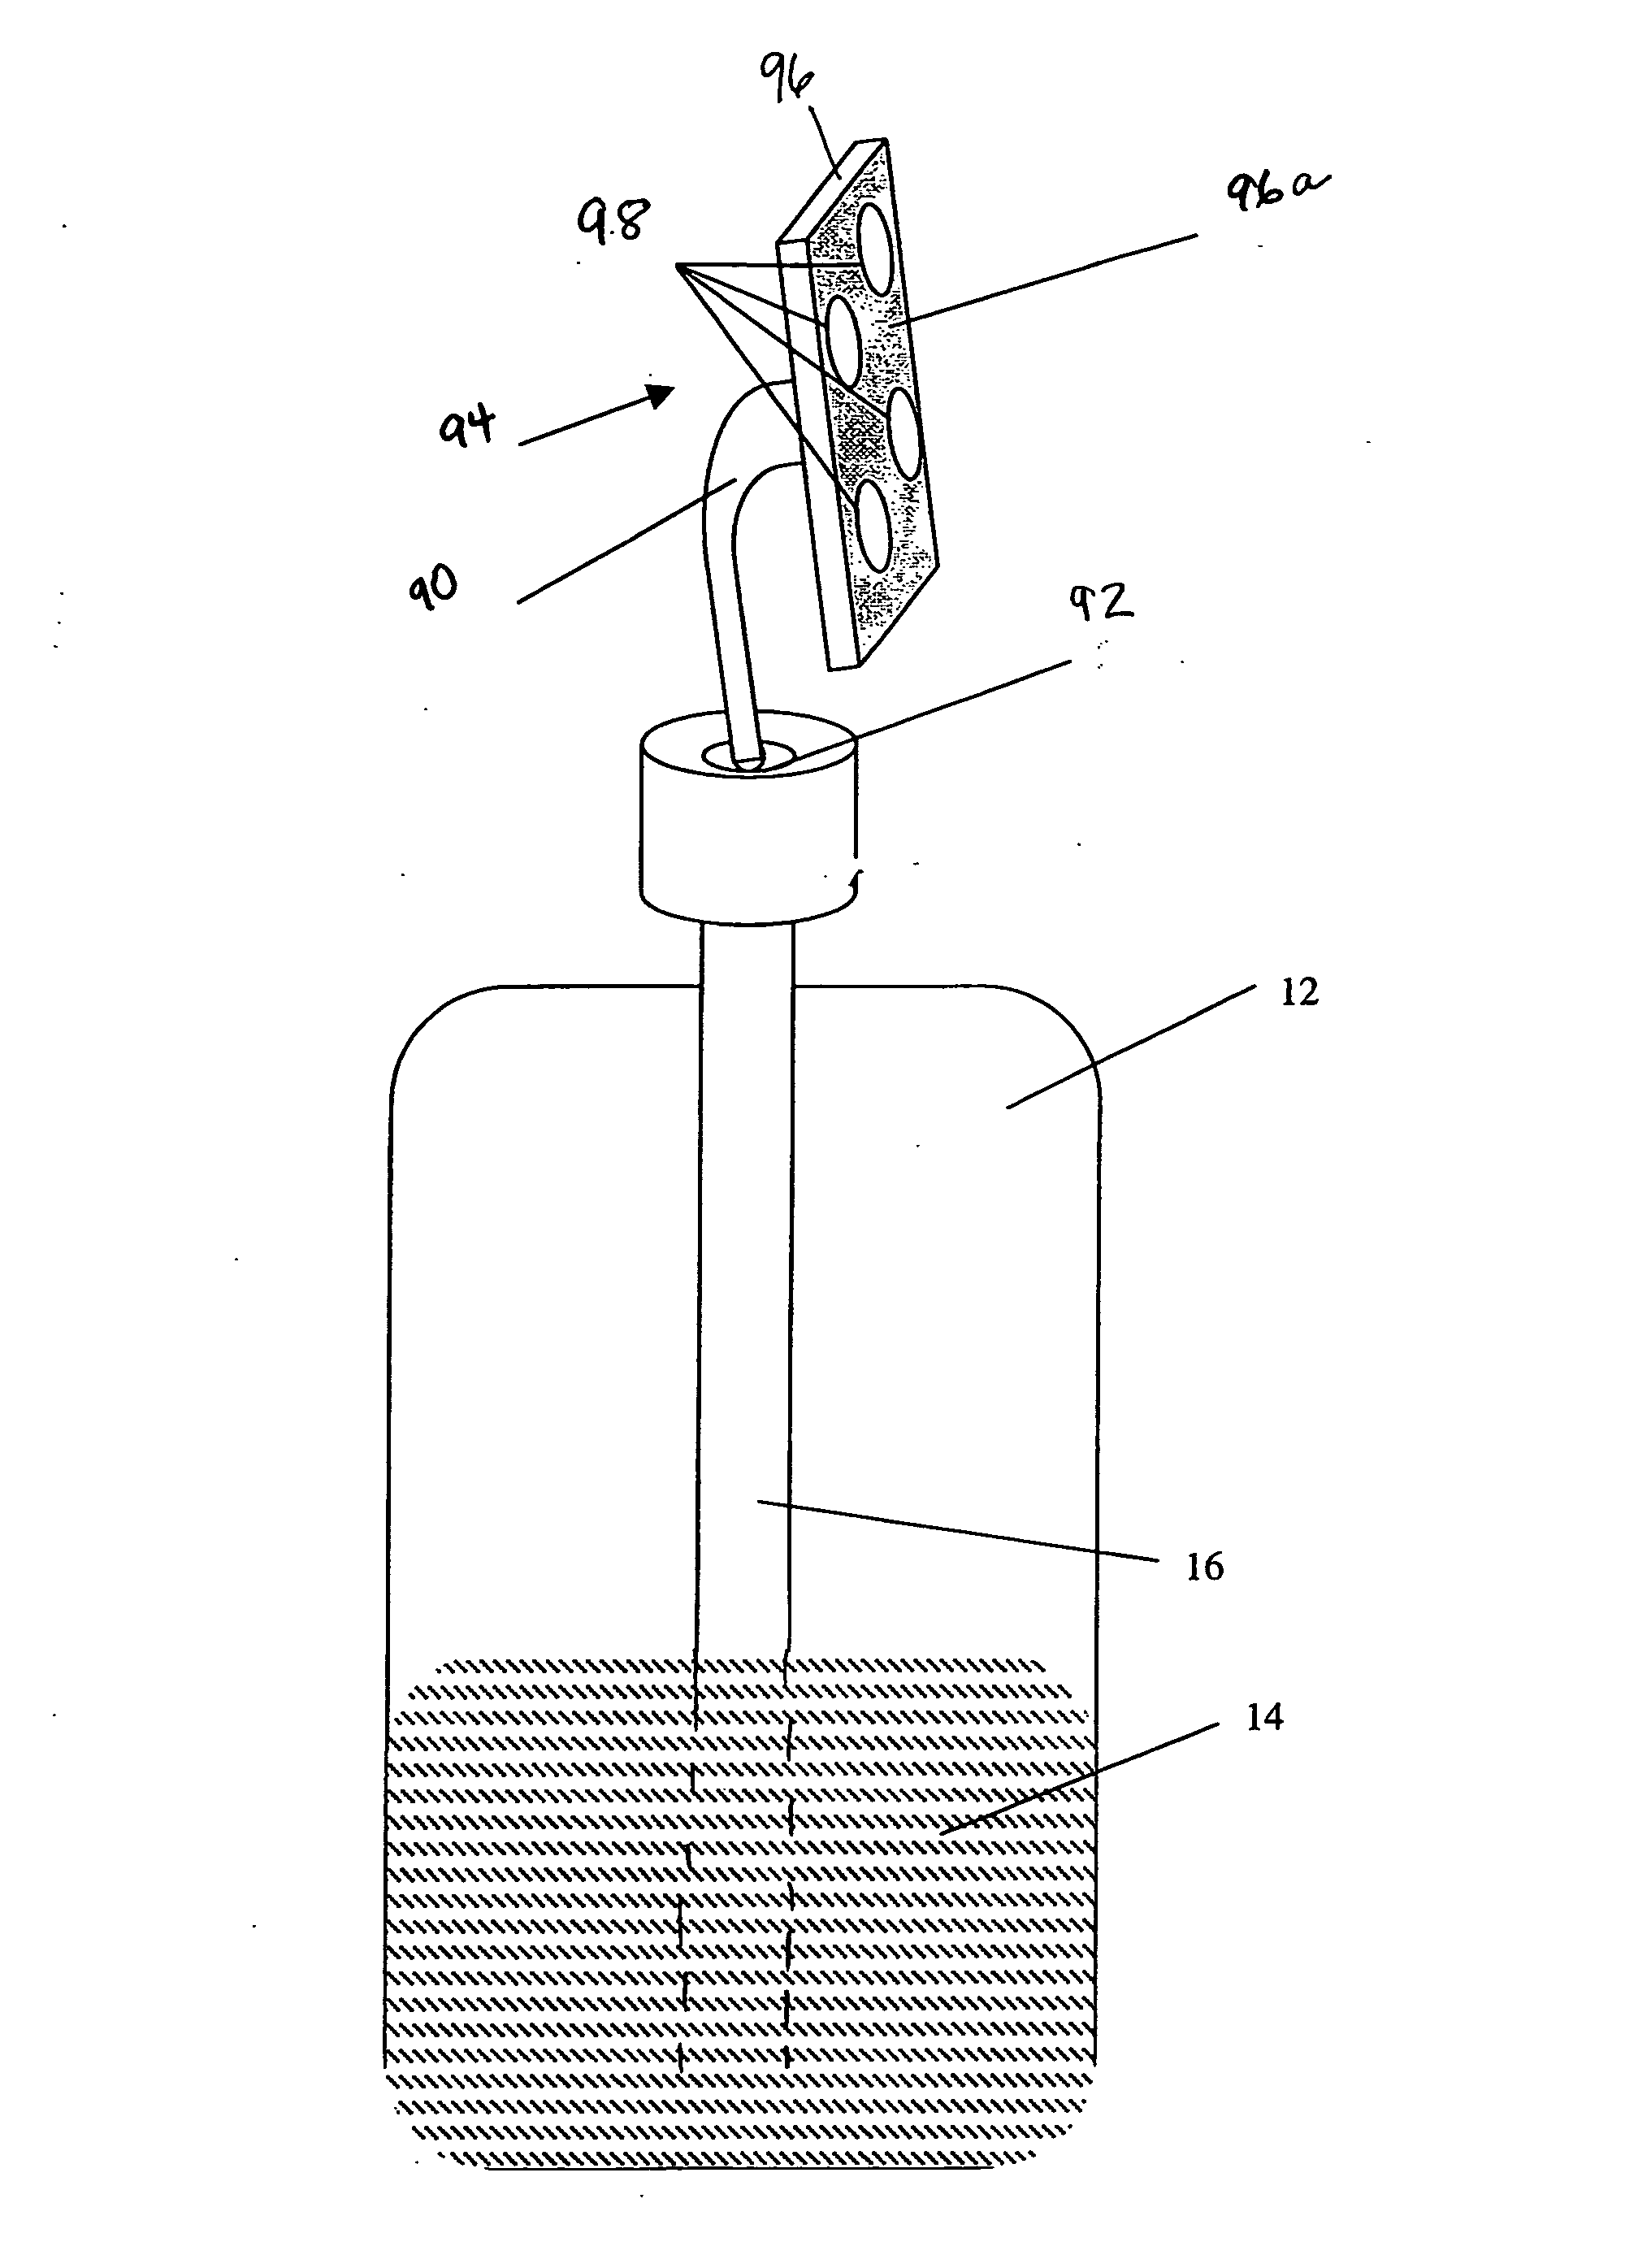 Apparatus and method for releasing a measured amount of content from a container